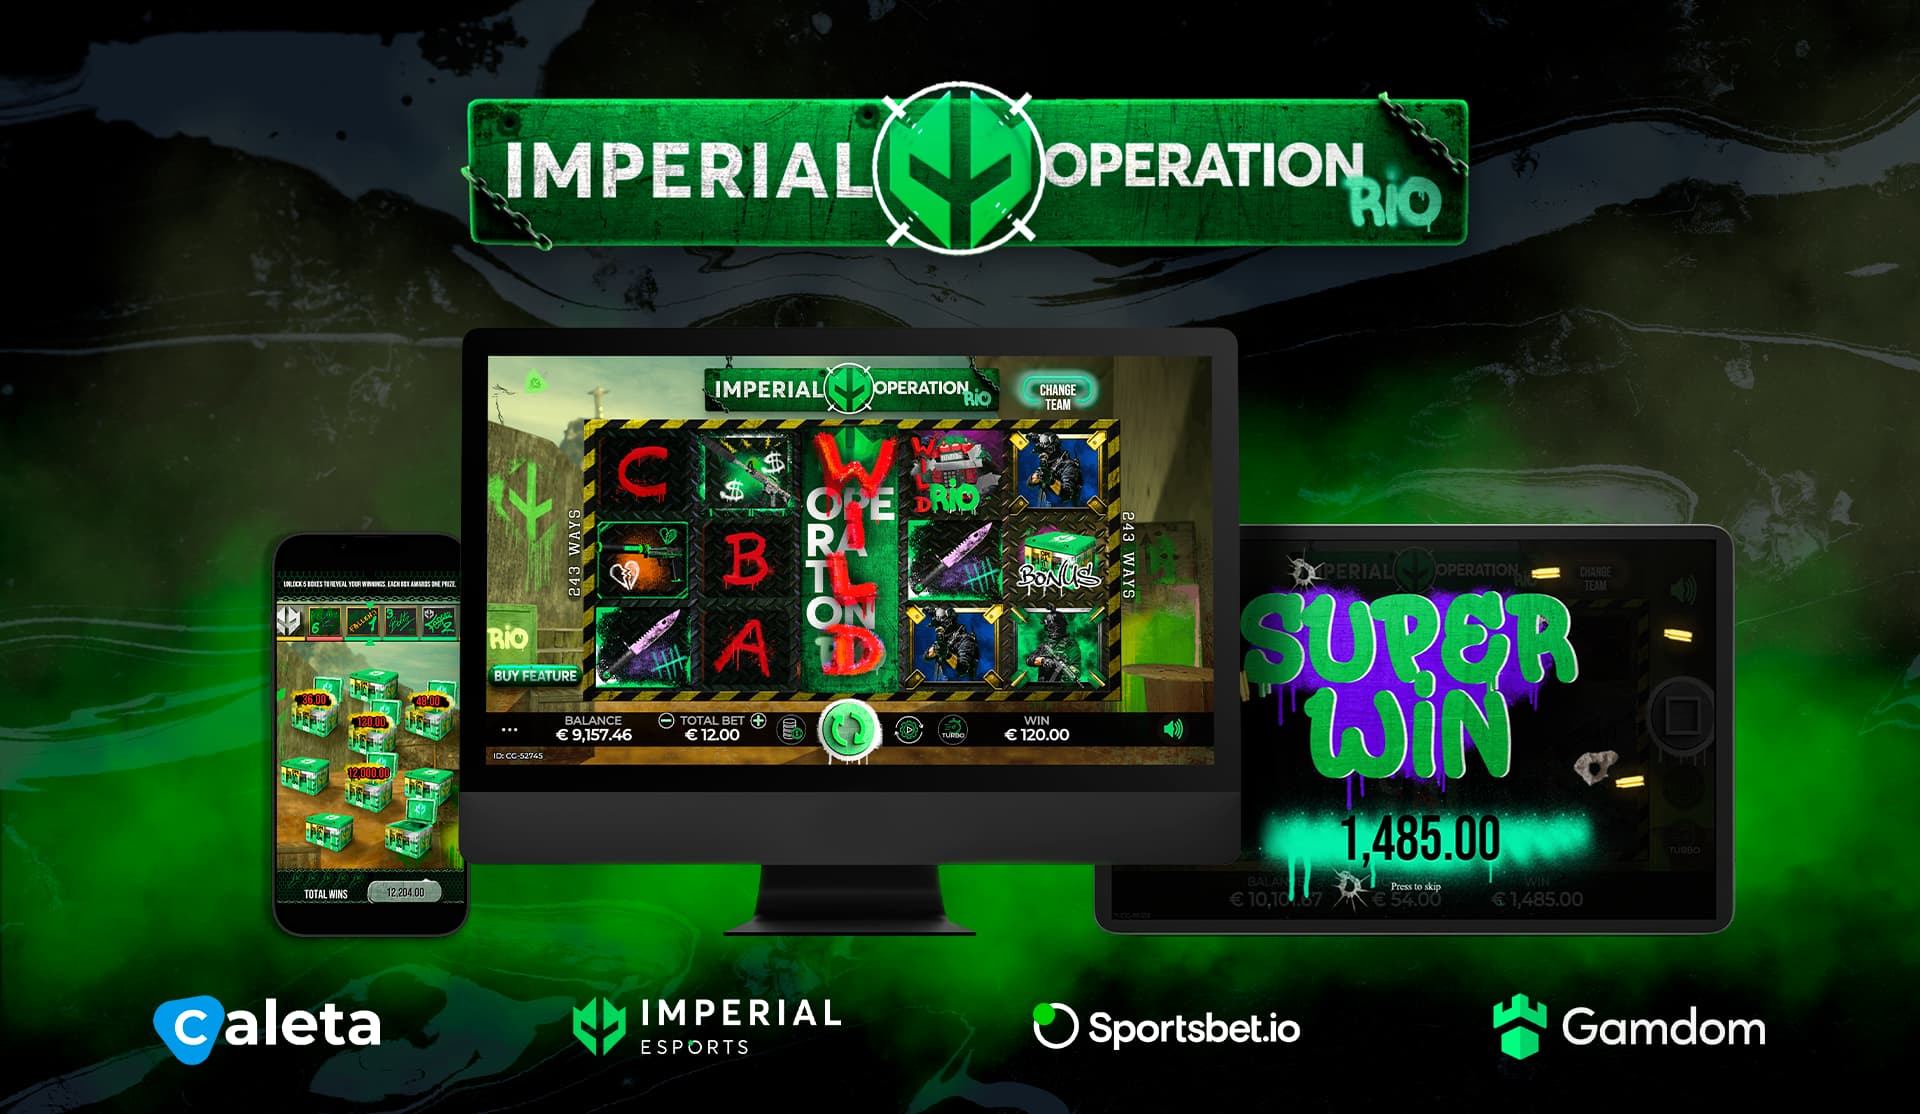 Caleta Gaming partners with Imperial Sportsbet.io to release the slot Imperial Operation Rio